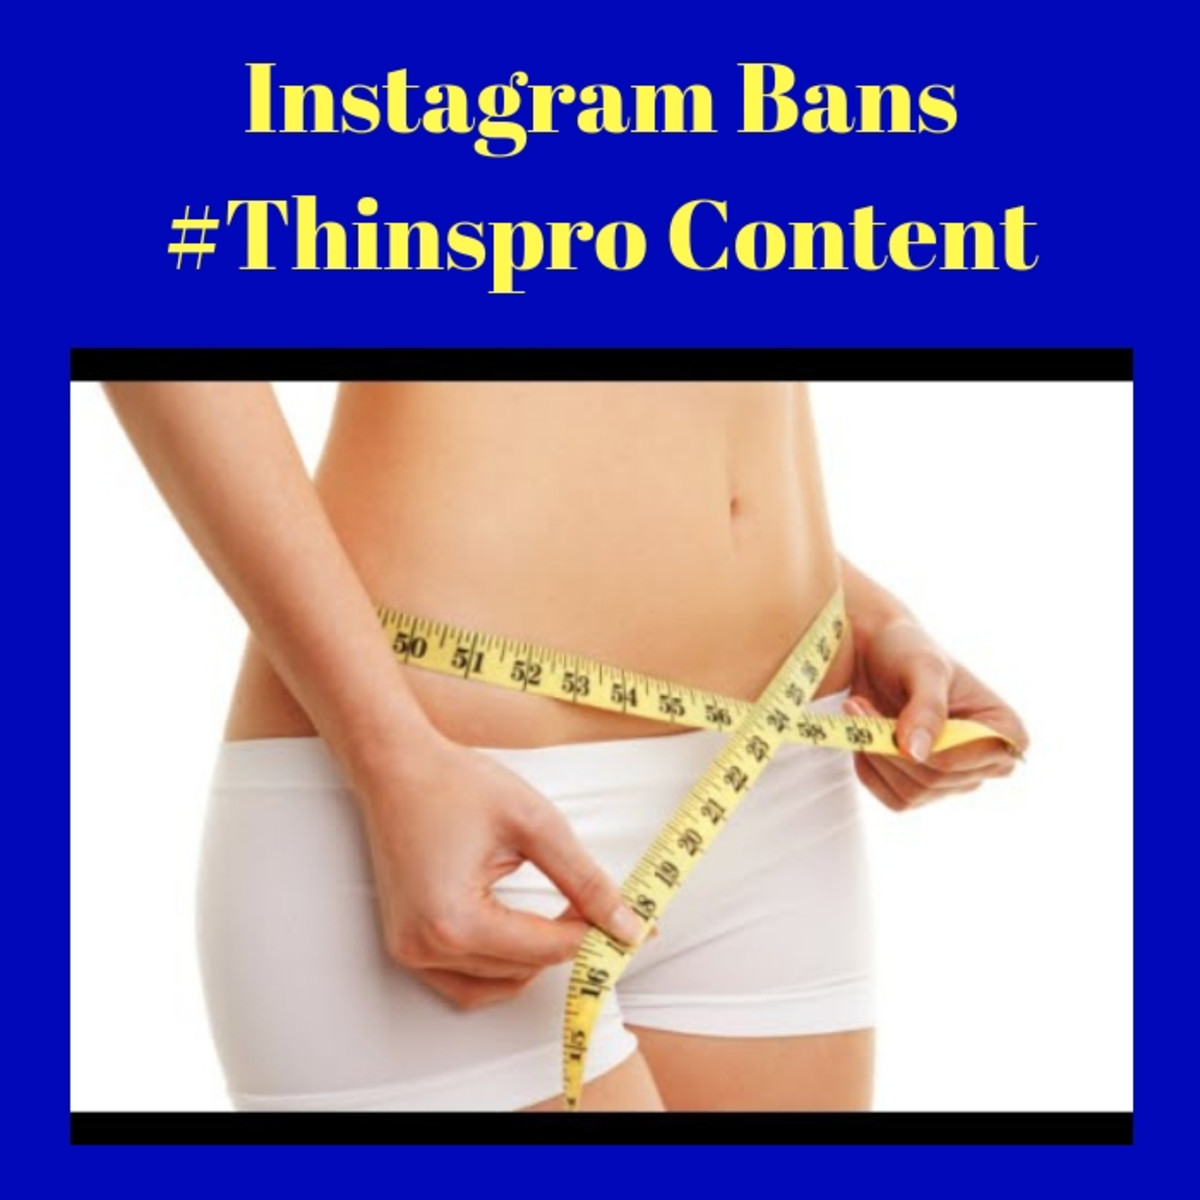 are-instagram-communities-promoting-eating-disorders